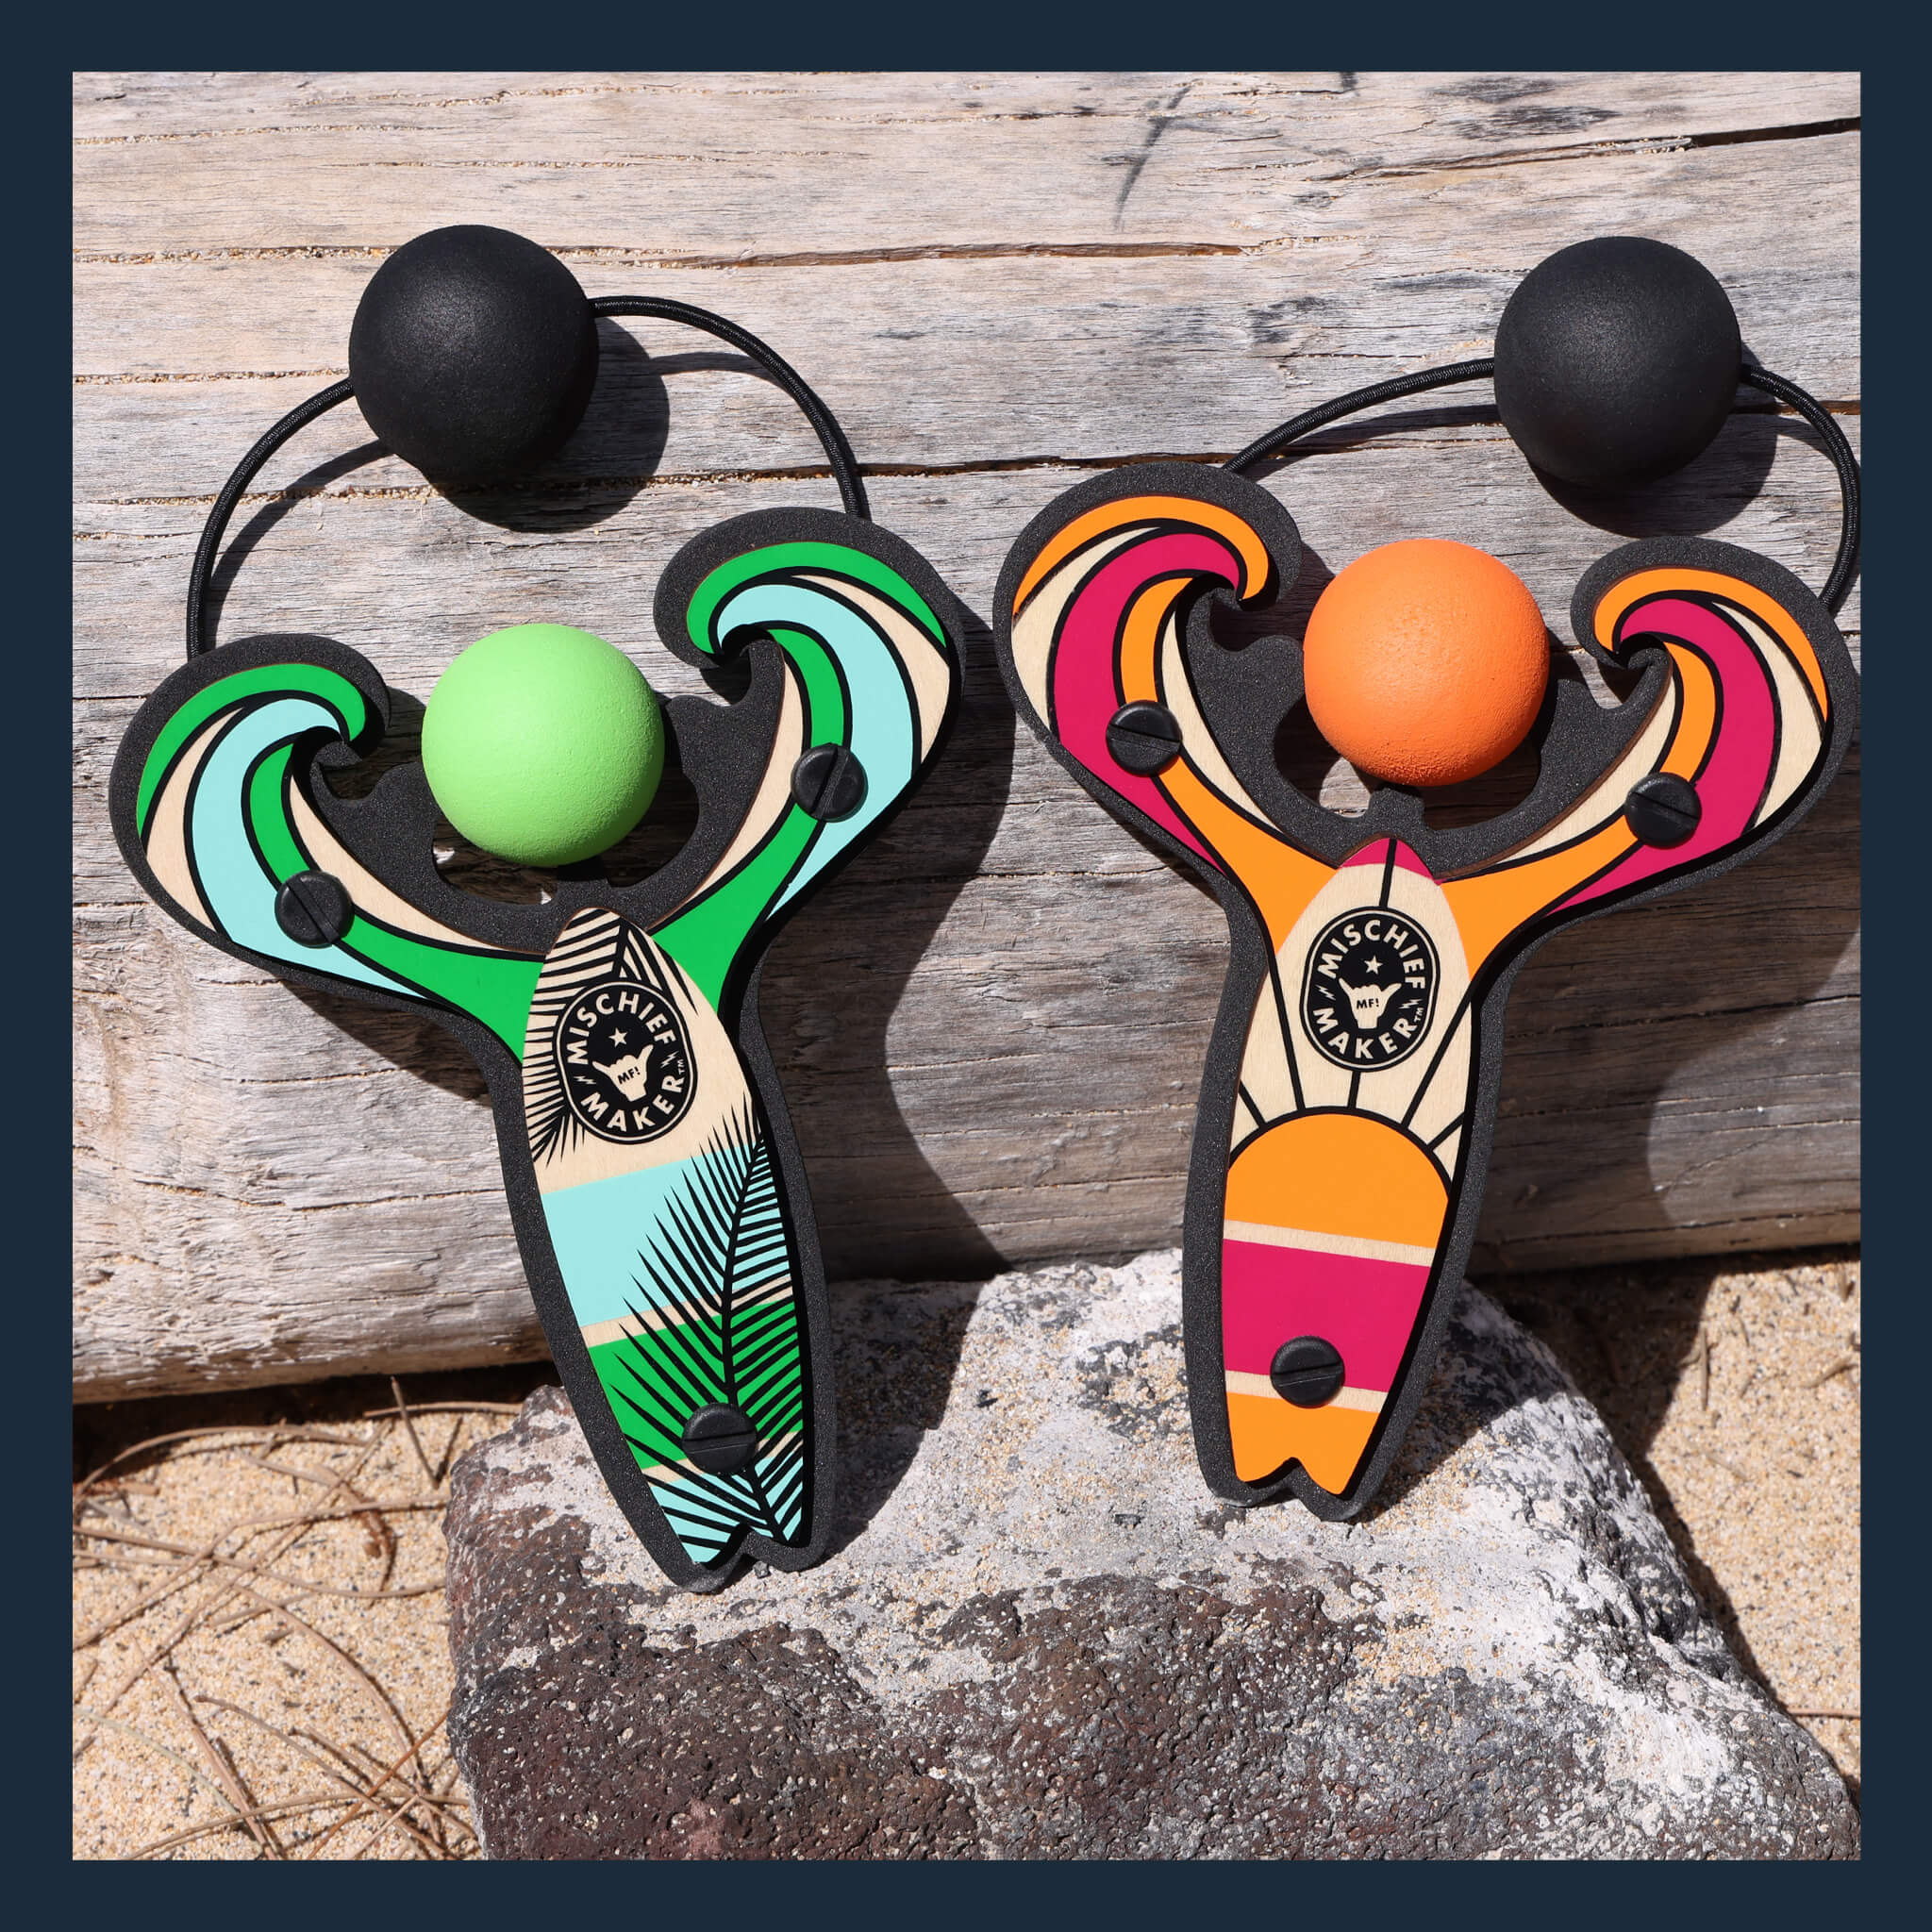 Green and Orange Surf’s Up toy slingshots in the sand on the beach. Mischief Maker by Mighty Fun!